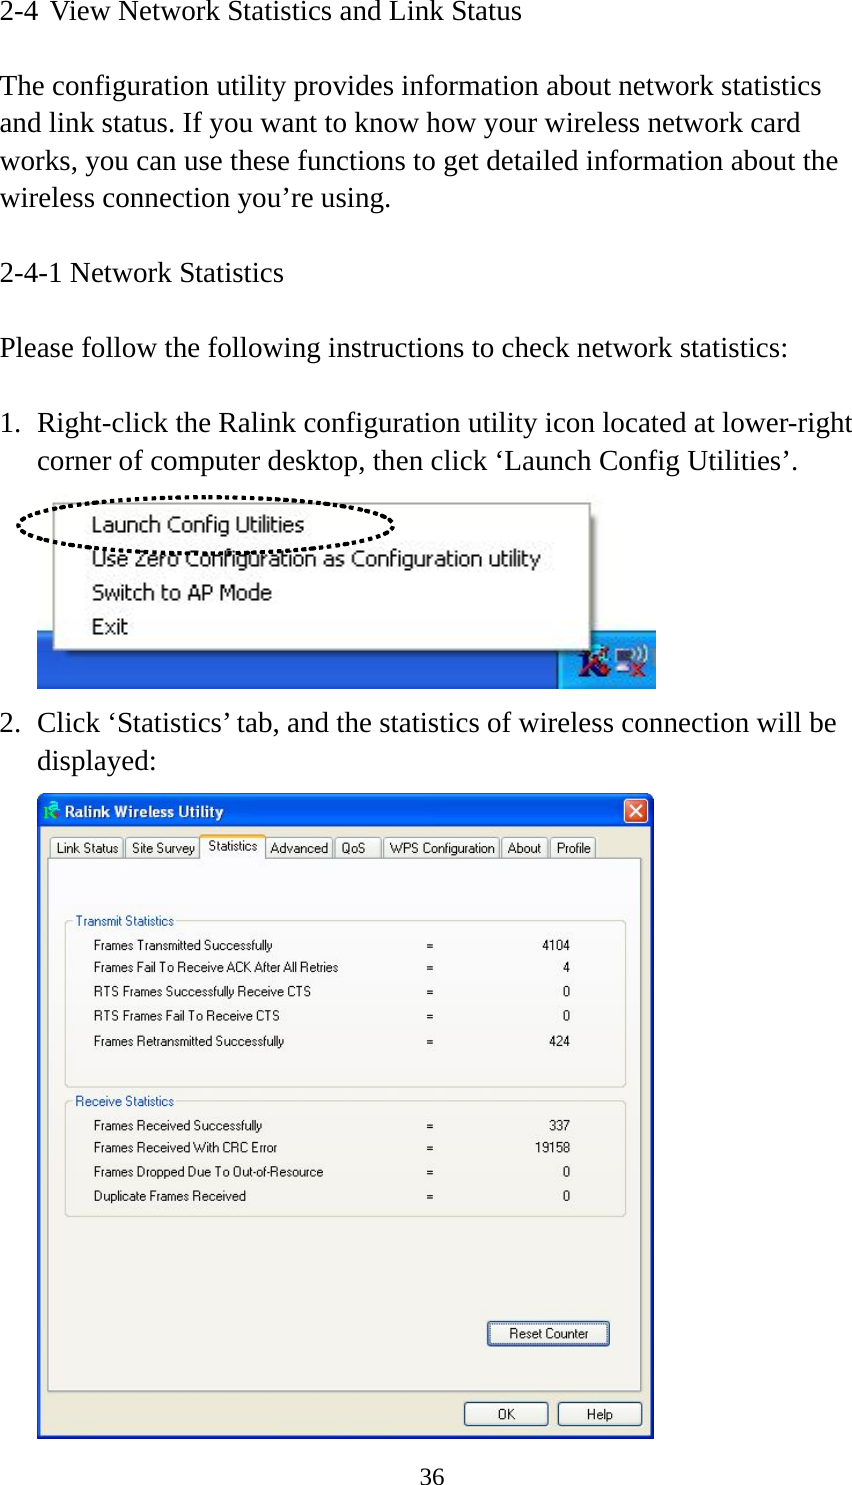  362-4 View Network Statistics and Link Status  The configuration utility provides information about network statistics and link status. If you want to know how your wireless network card works, you can use these functions to get detailed information about the wireless connection you’re using.  2-4-1 Network Statistics  Please follow the following instructions to check network statistics:  1. Right-click the Ralink configuration utility icon located at lower-right corner of computer desktop, then click ‘Launch Config Utilities’.  2. Click ‘Statistics’ tab, and the statistics of wireless connection will be displayed:  